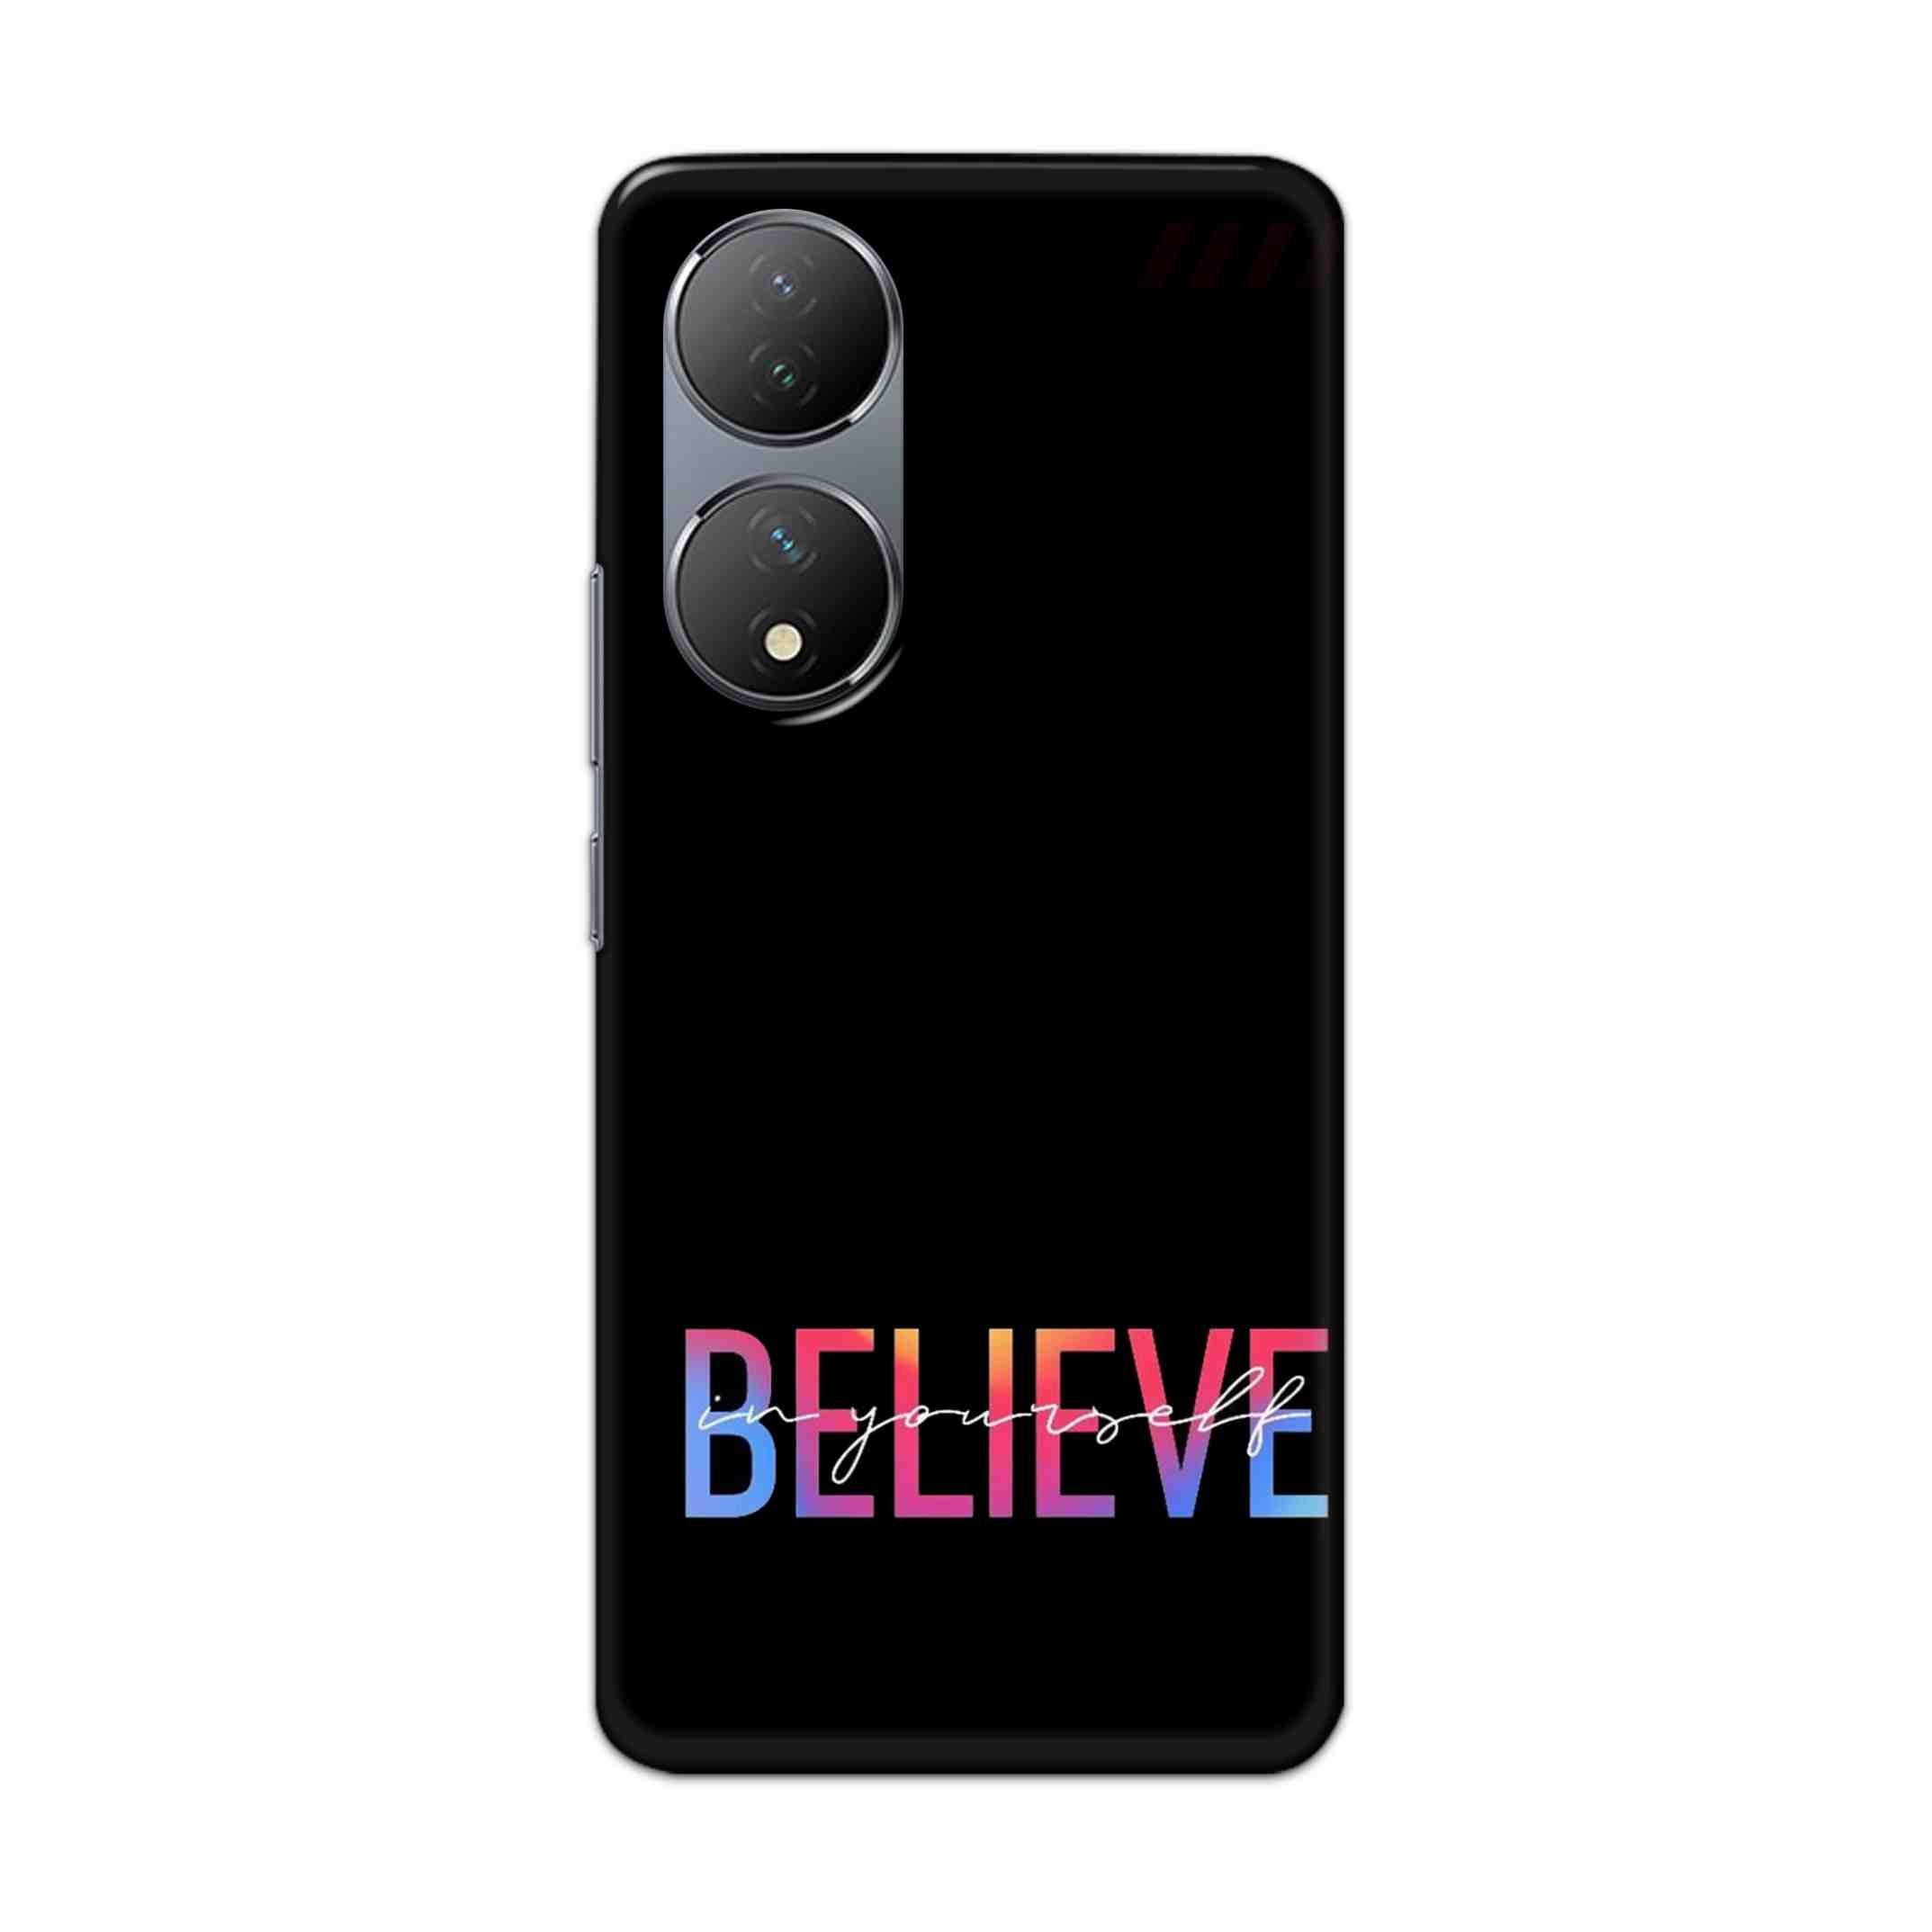 Buy Believe Hard Back Mobile Phone Case Cover For Vivo Y100 Online